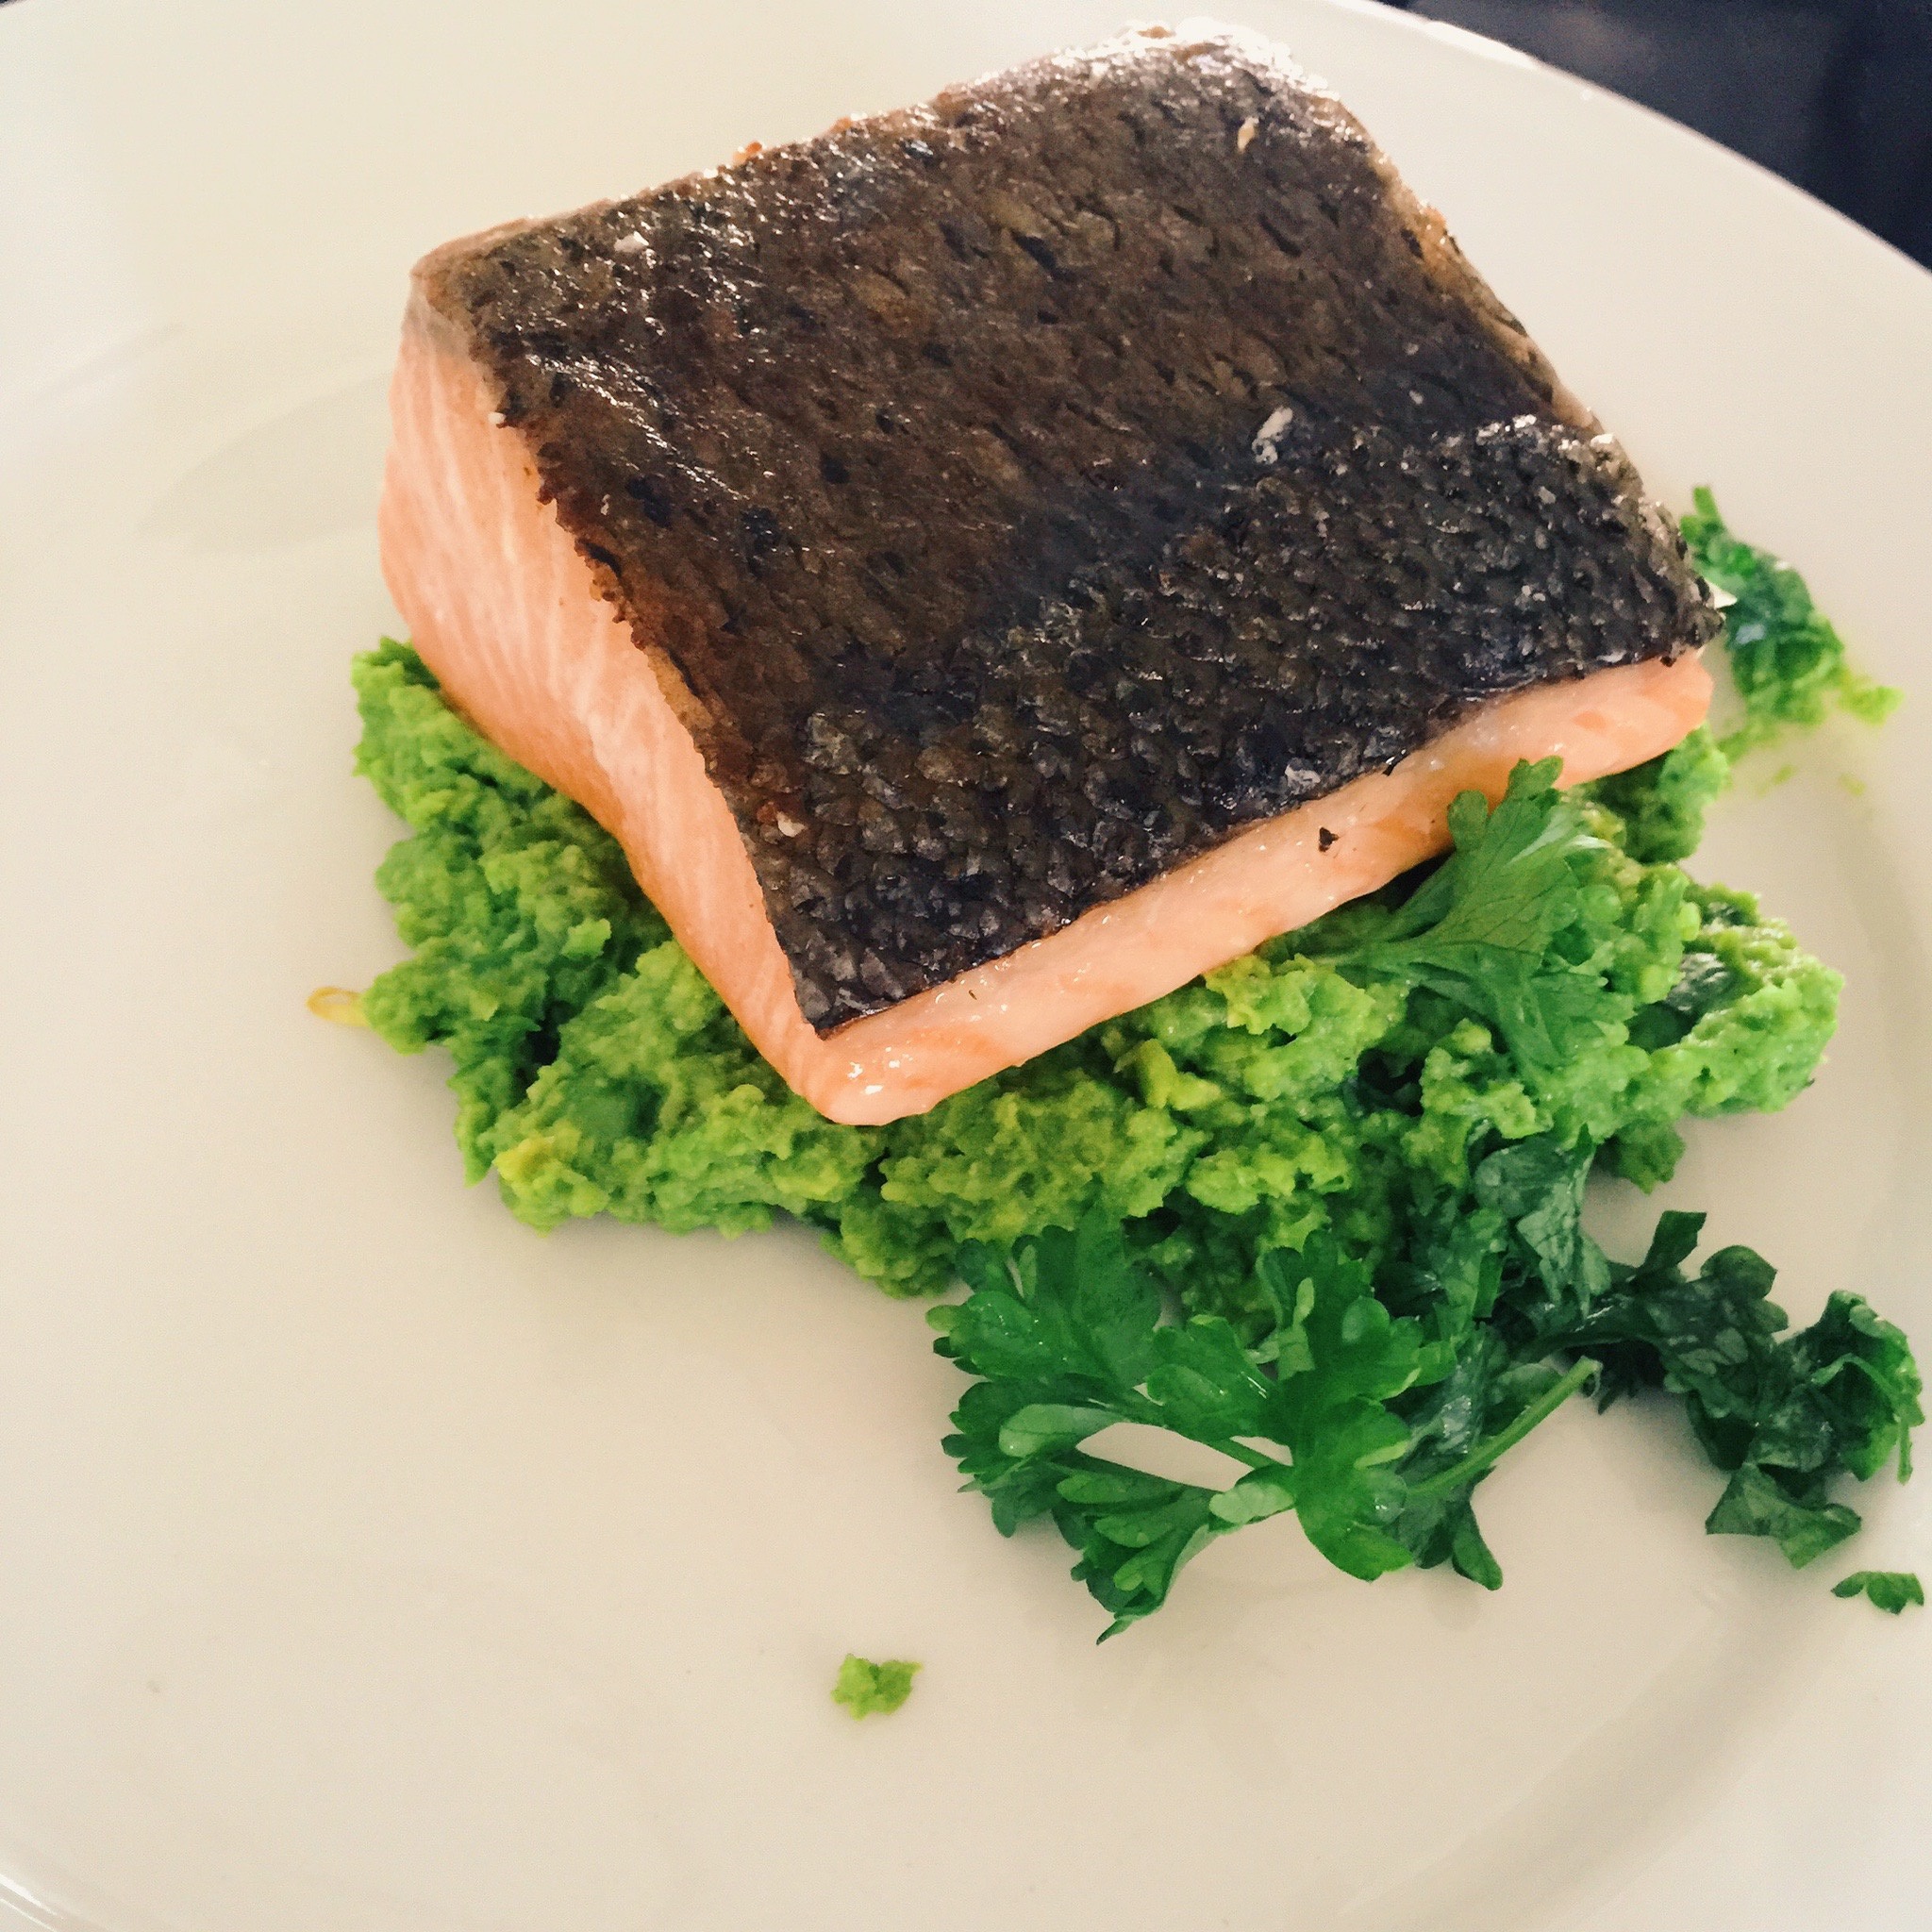 Sous Vide Salmon with Mashed Green Peas 低温慢煮三文鱼配豌豆泥的做法